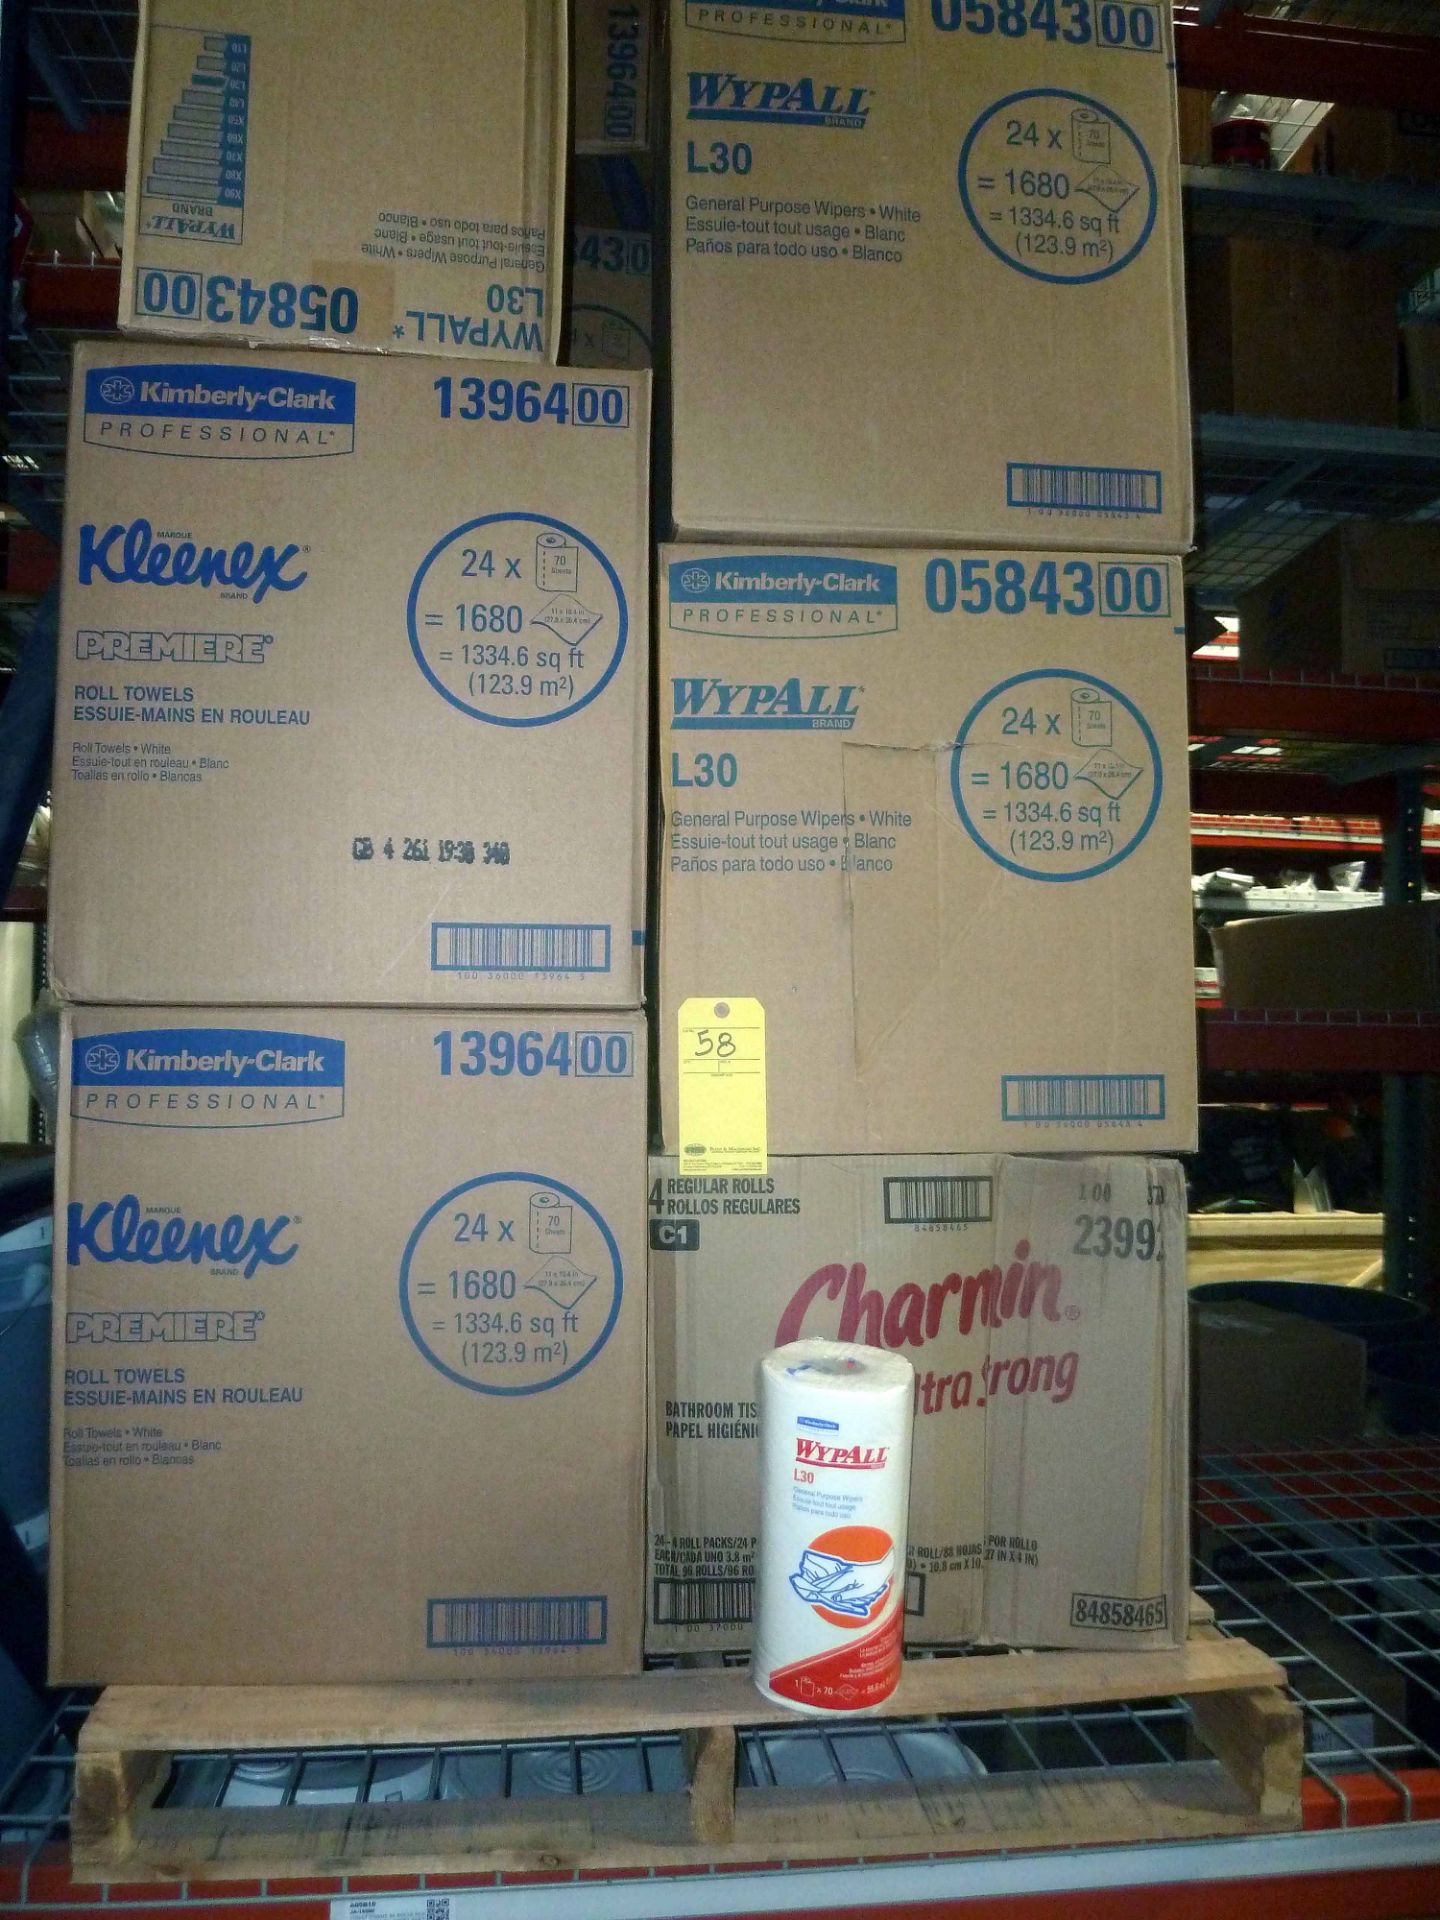 LOT OF CONSISTING OF WYPALL & KLEENEX PAPER TOWELS  &  CHARMIN TOILET PAPER (approx. 10 boxes -